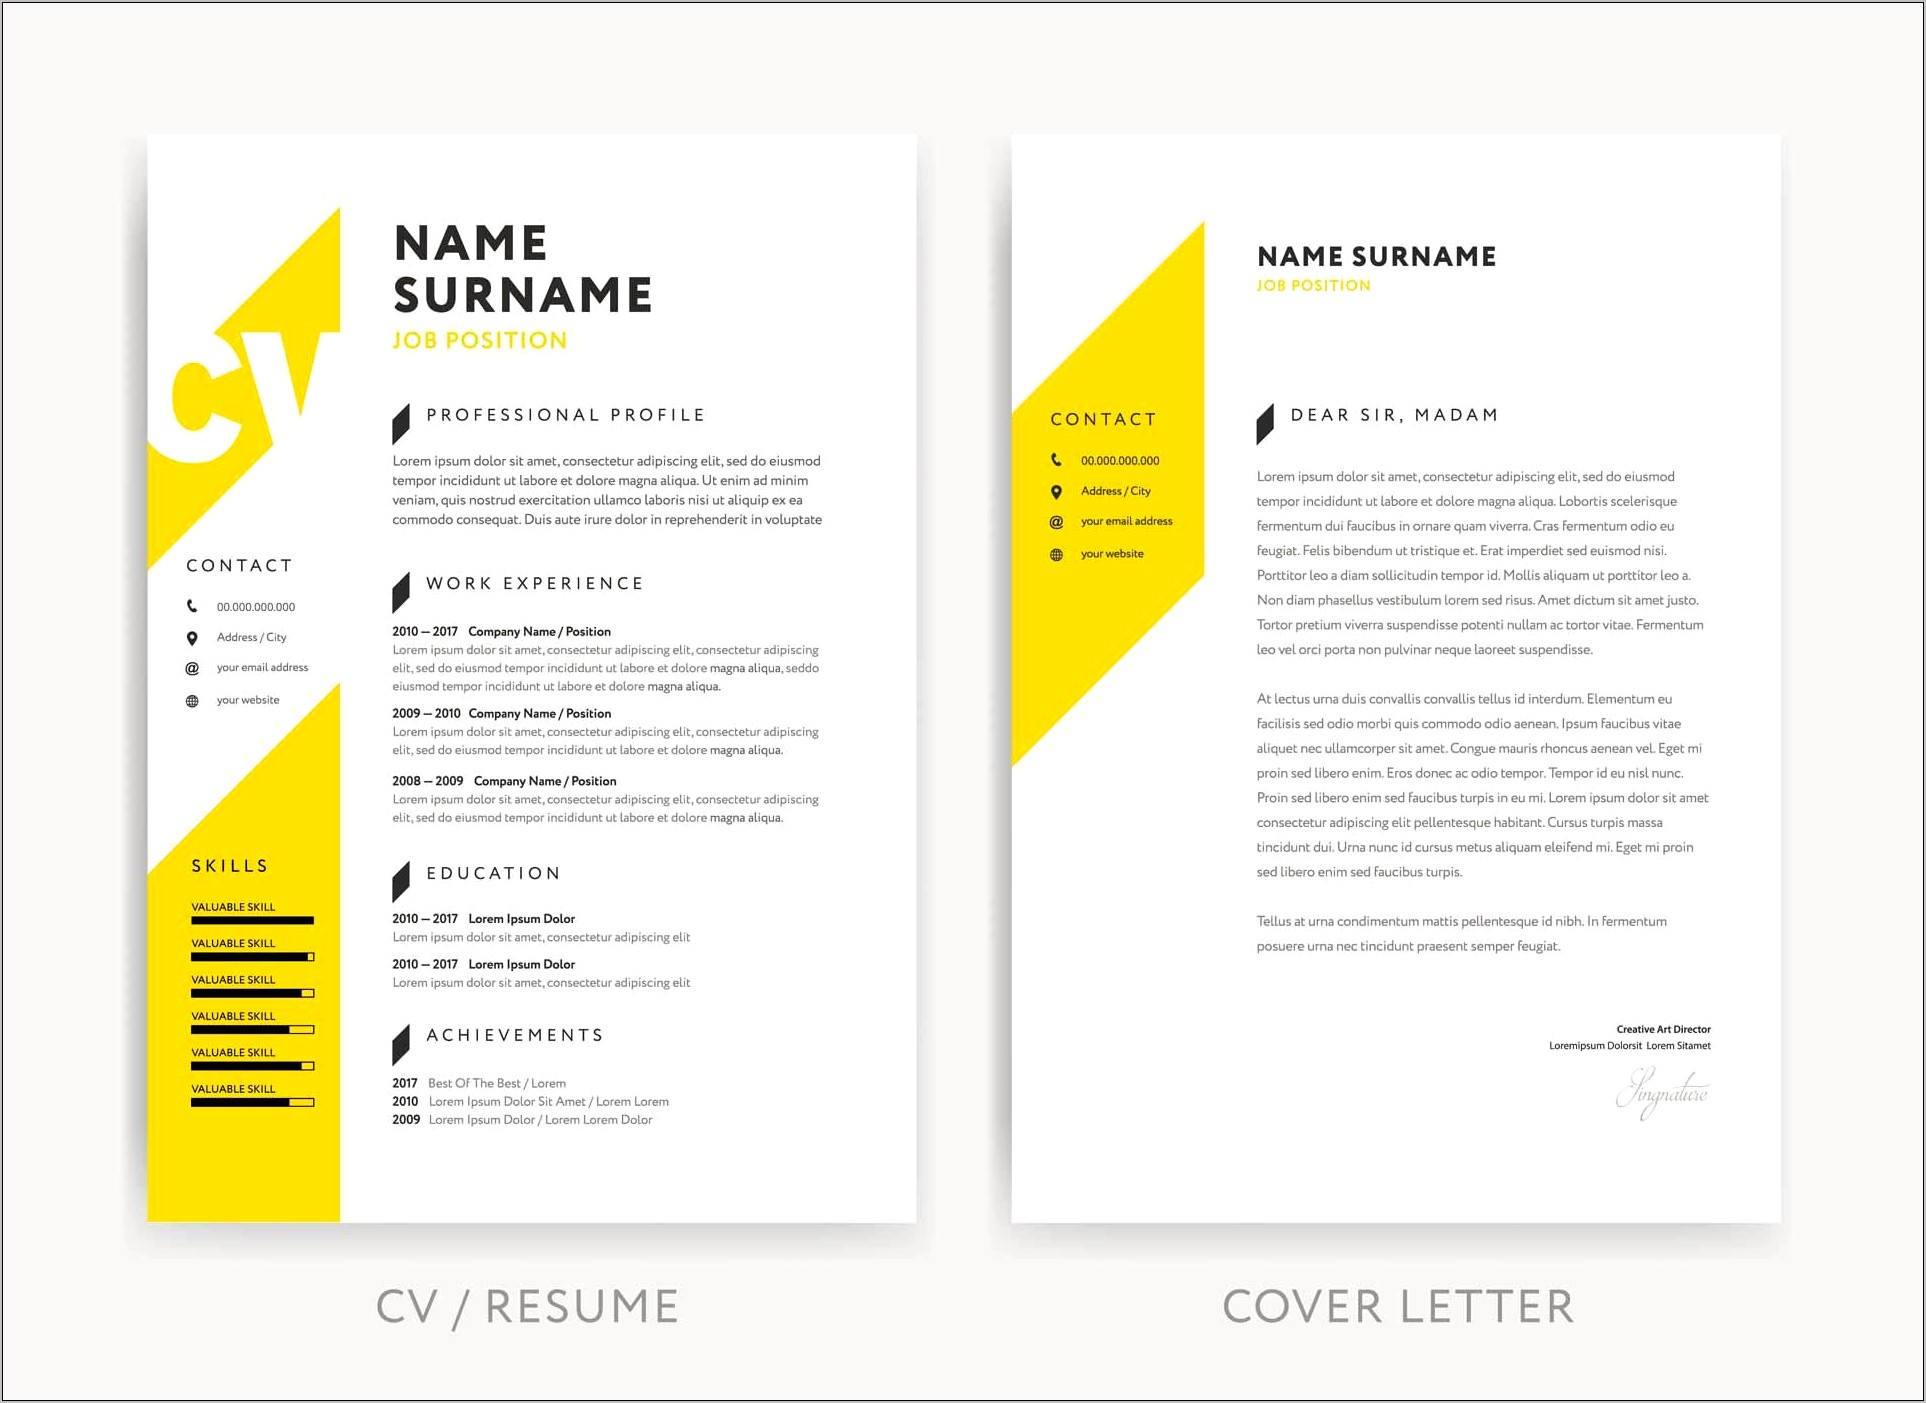 Length Of A Resume Cover Letter